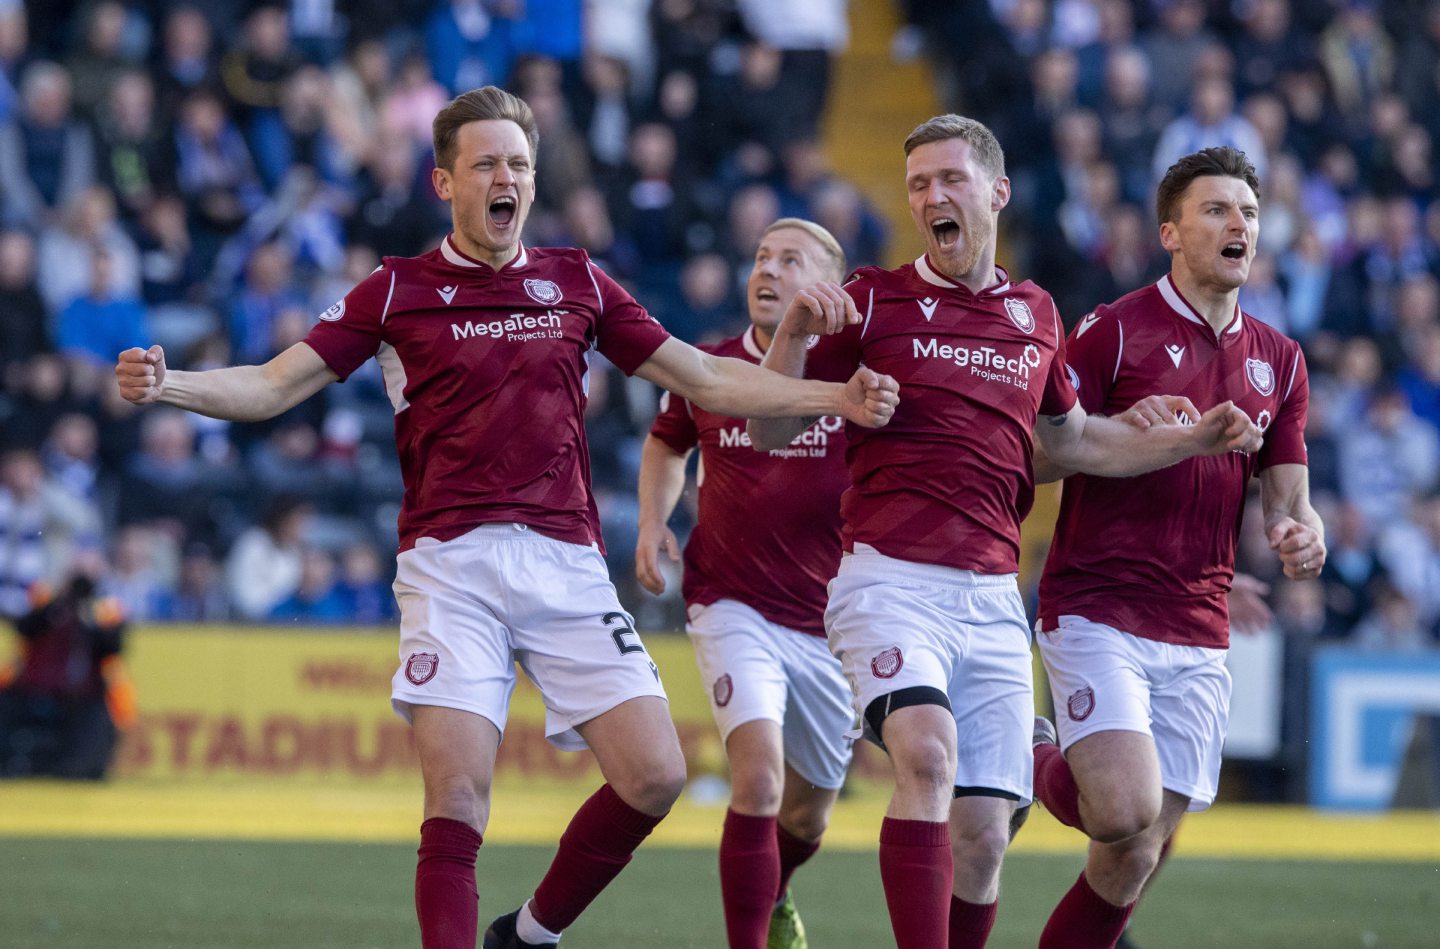 James Craigen and his Arbroath teammates celebrate after shocking Kimlarnock with an early goal on the penultimate game of the season.